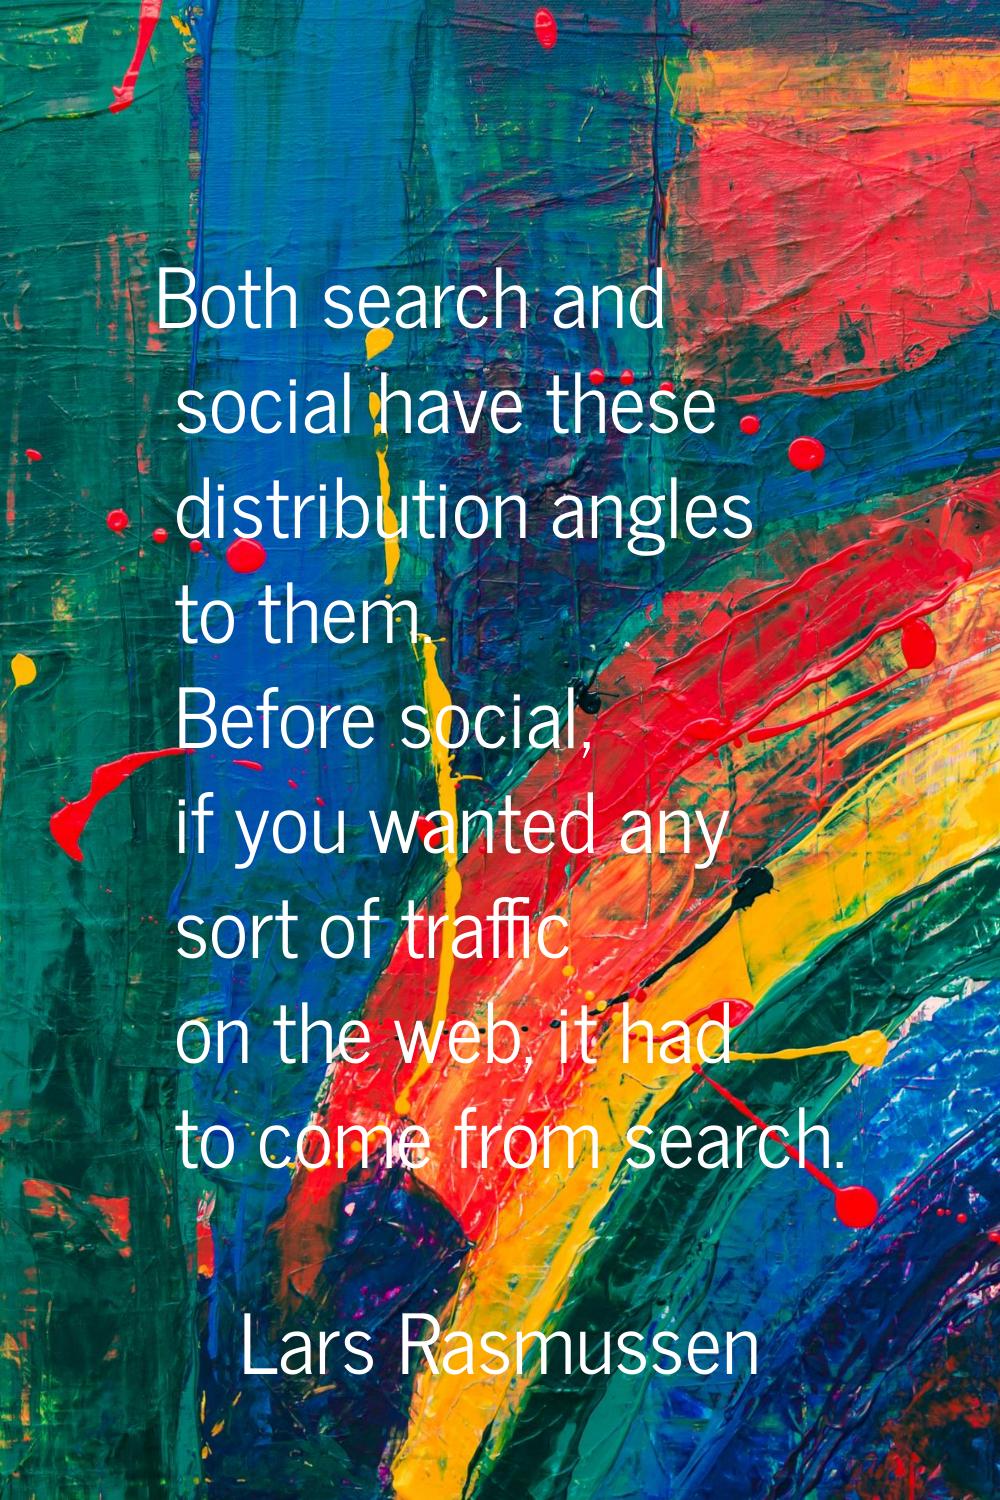 Both search and social have these distribution angles to them. Before social, if you wanted any sor